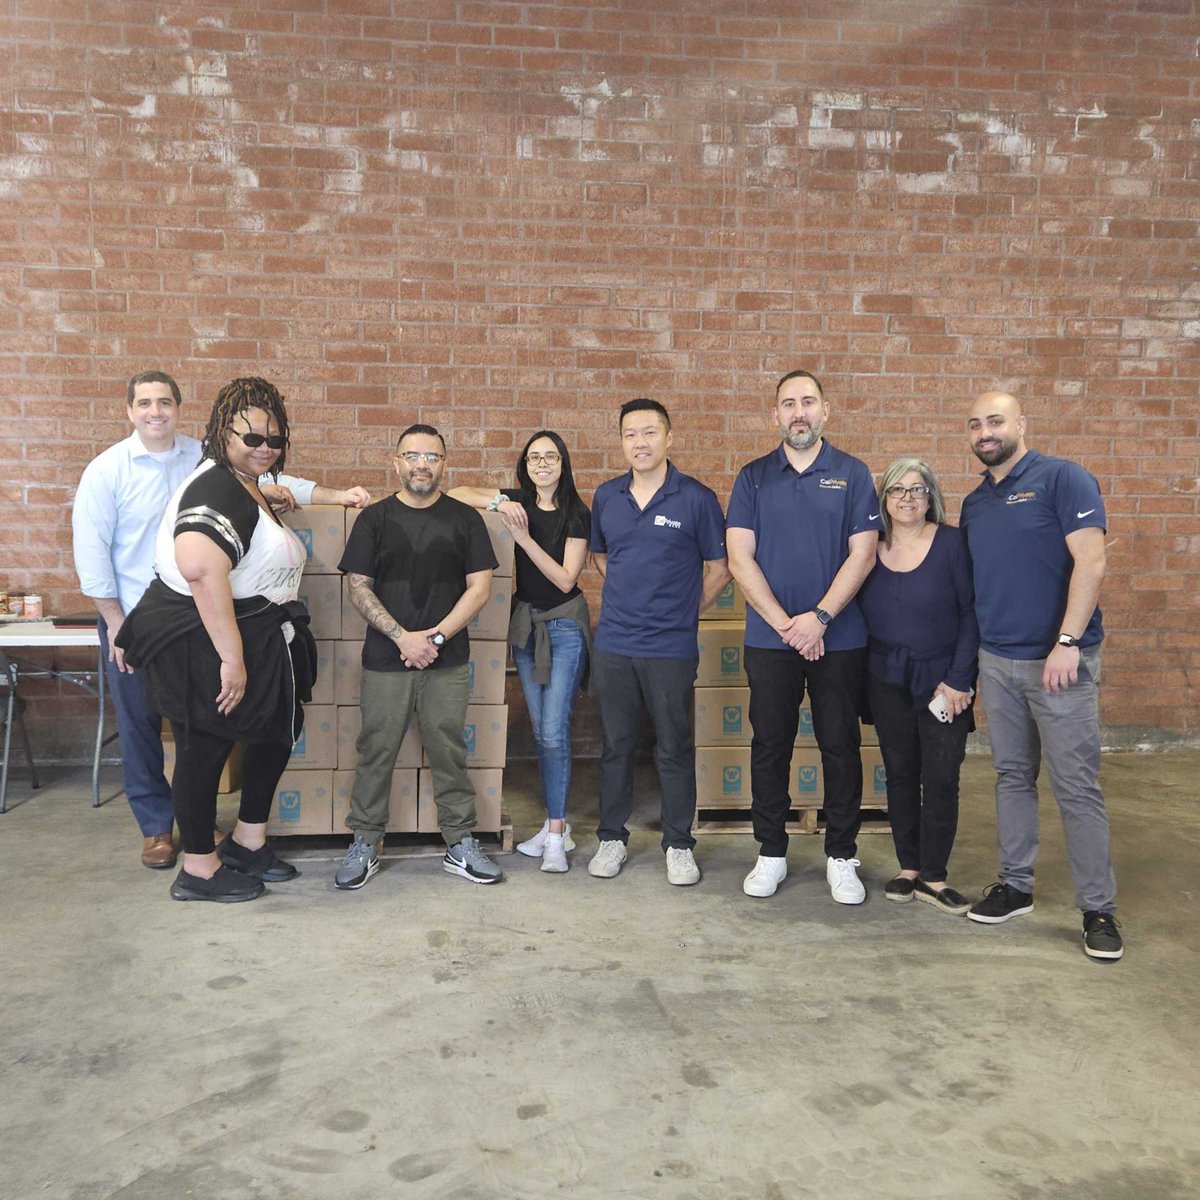 We had a great time with CalPrivate Bank at our warehouse sorting food for our community. Thank you for consistently supporting Westside Food Bank! We are so grateful to you